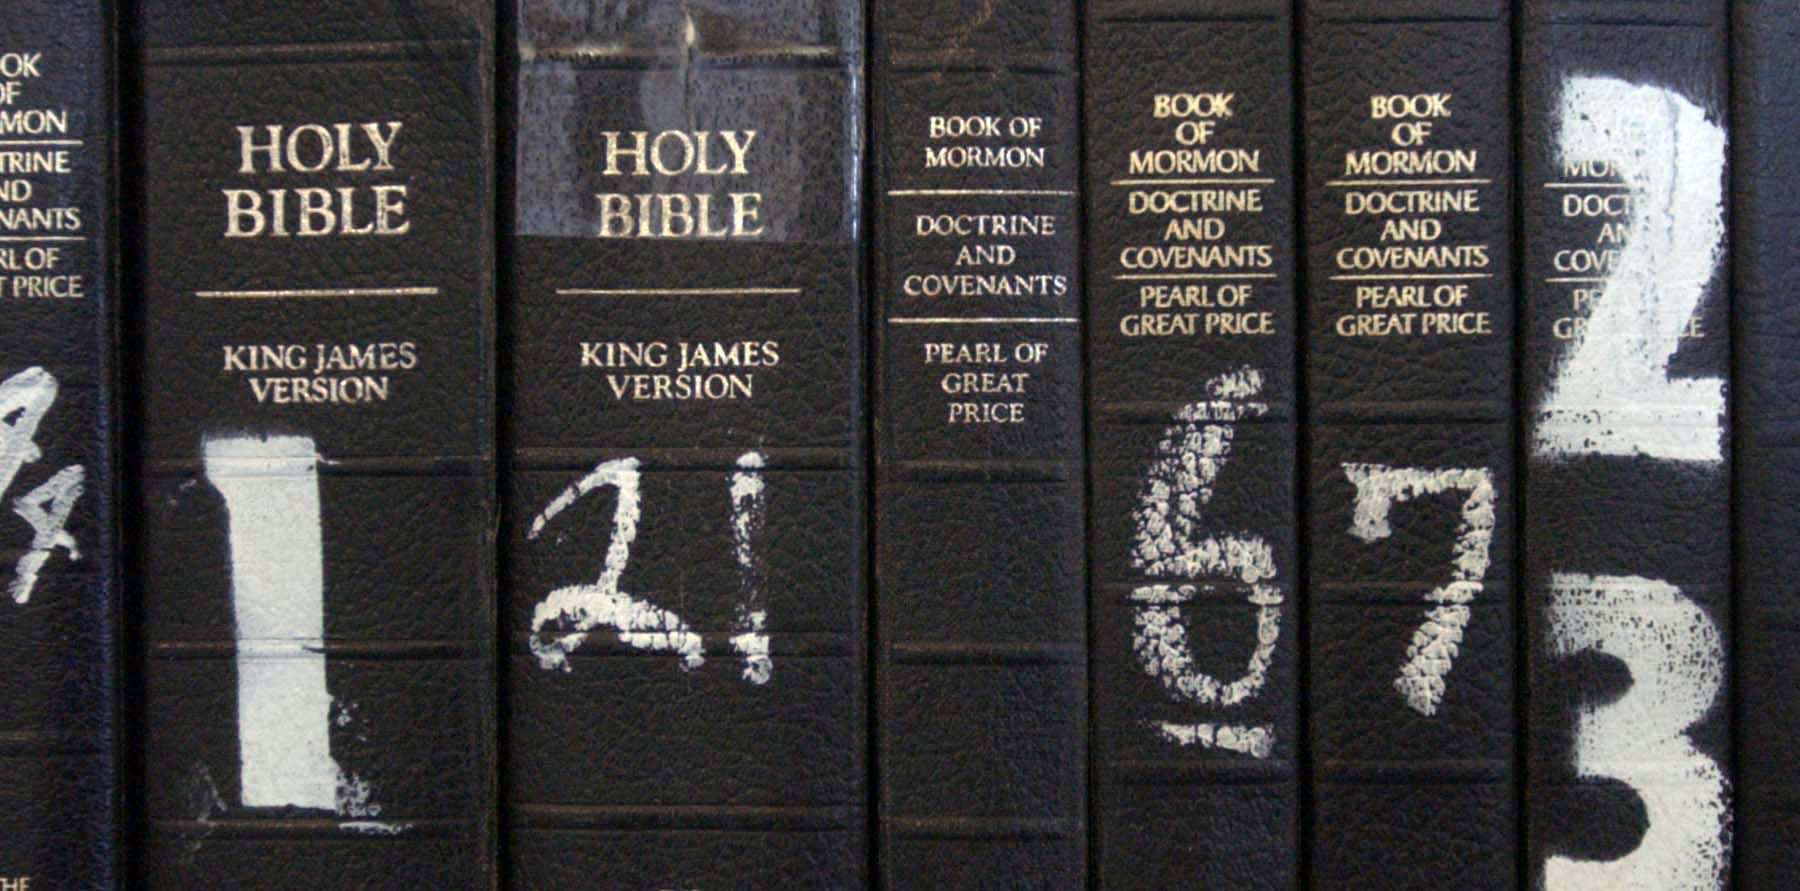 Bible Quotation - Utah parent says Bible contains porn and should be removed from school  libraries